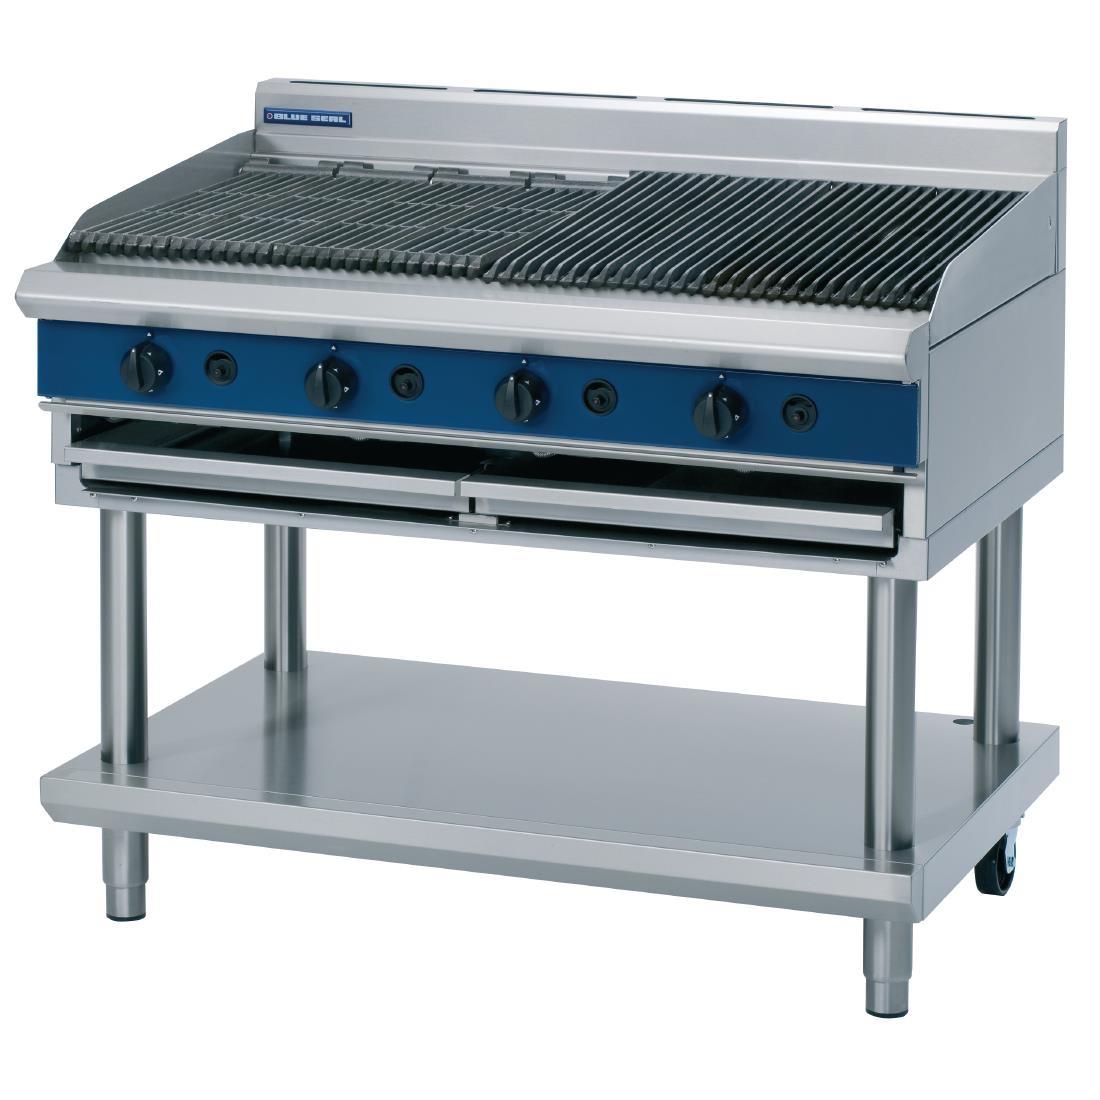 Blue Seal Evolution Chargrill with Leg Stand LPG 1200mm G598-LS/L - GK580-P  - 1